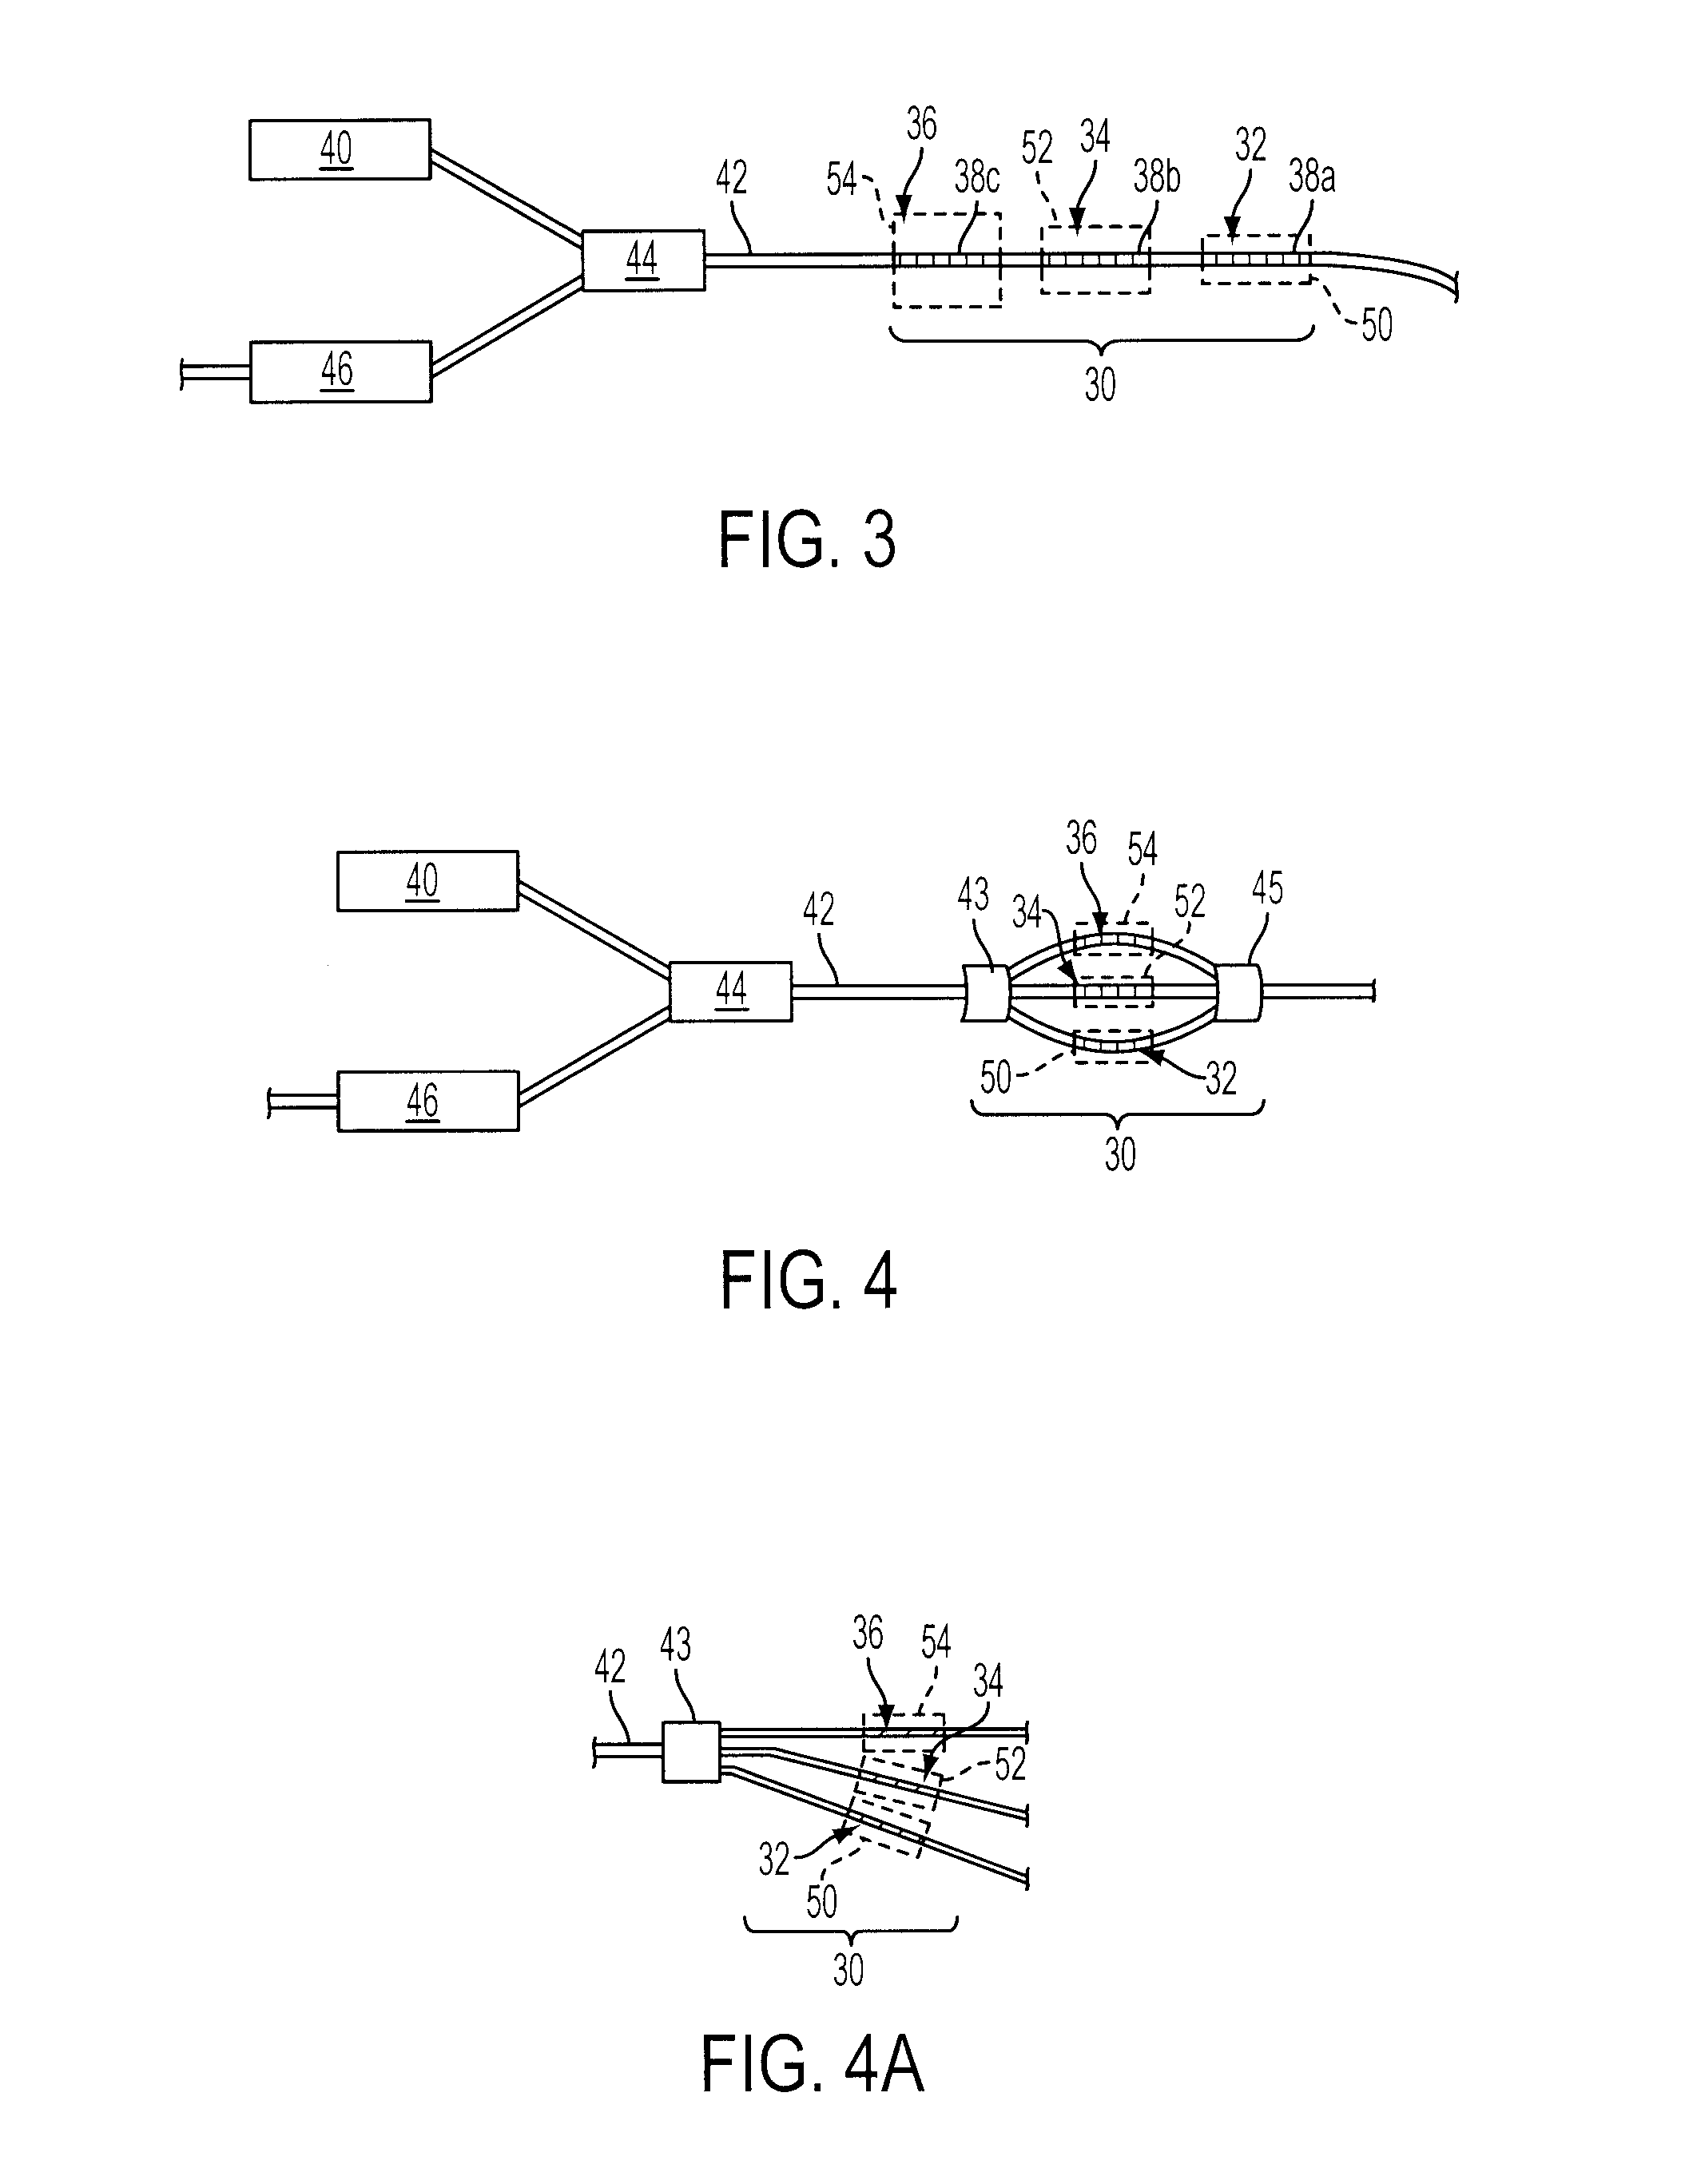 Method and System for Monitoring the Condition of Generator End Windings